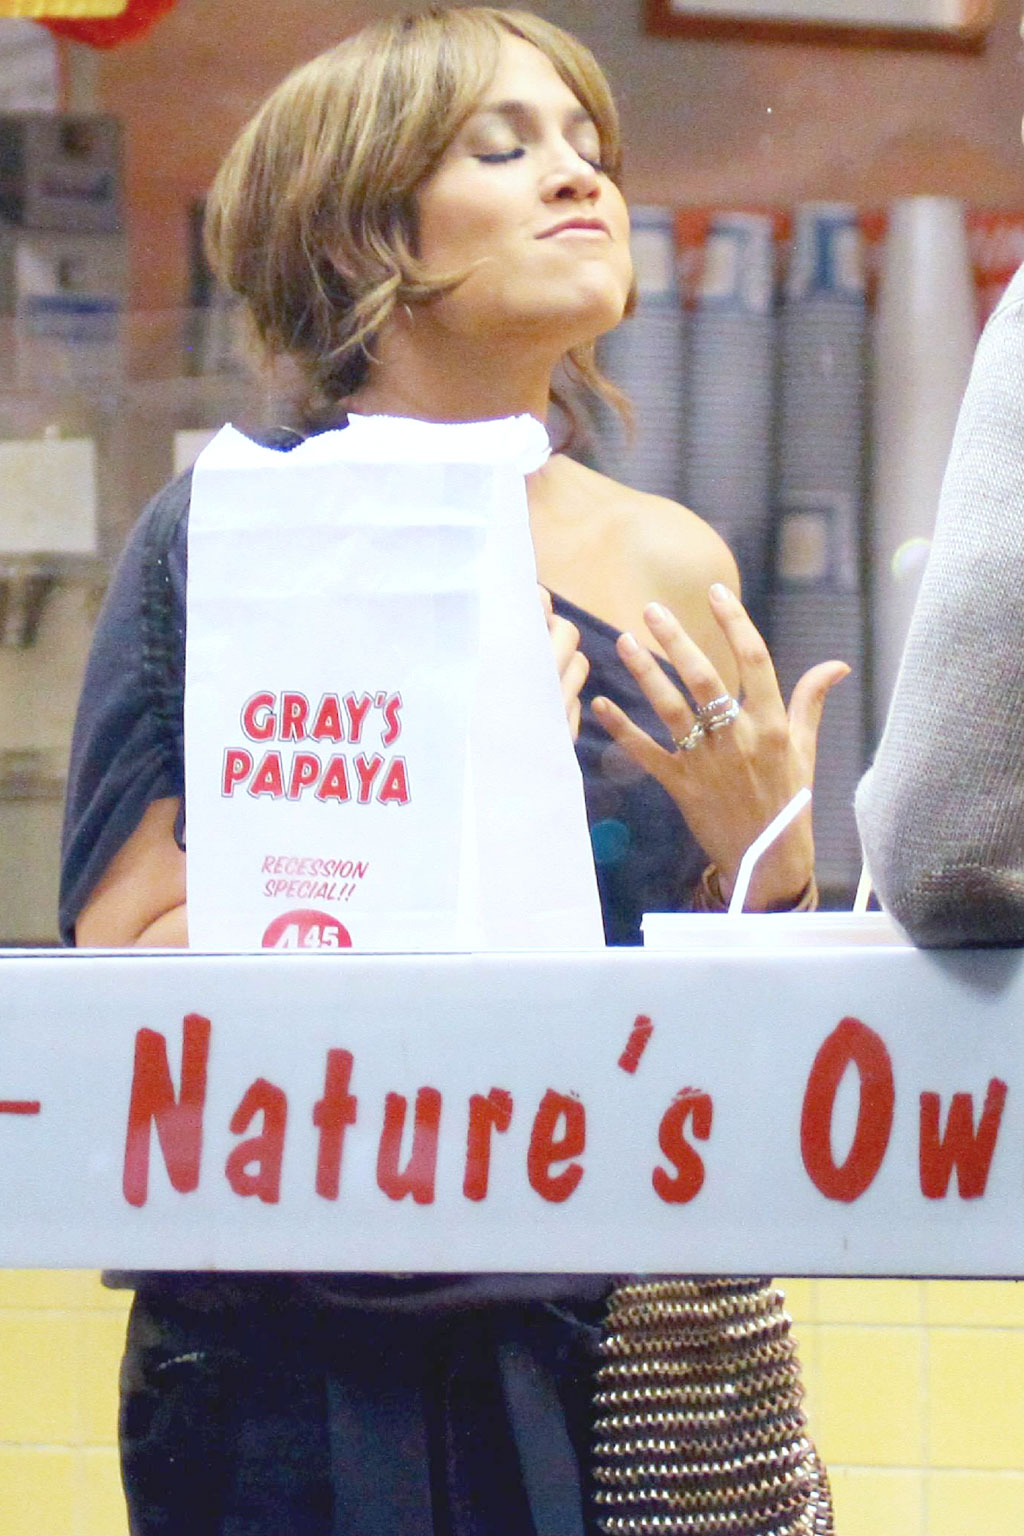 Jennifer Lopez at the Location For THE BACK-UP PLAN ON July 22, 2009 on the Streets of Manhattan, NY 